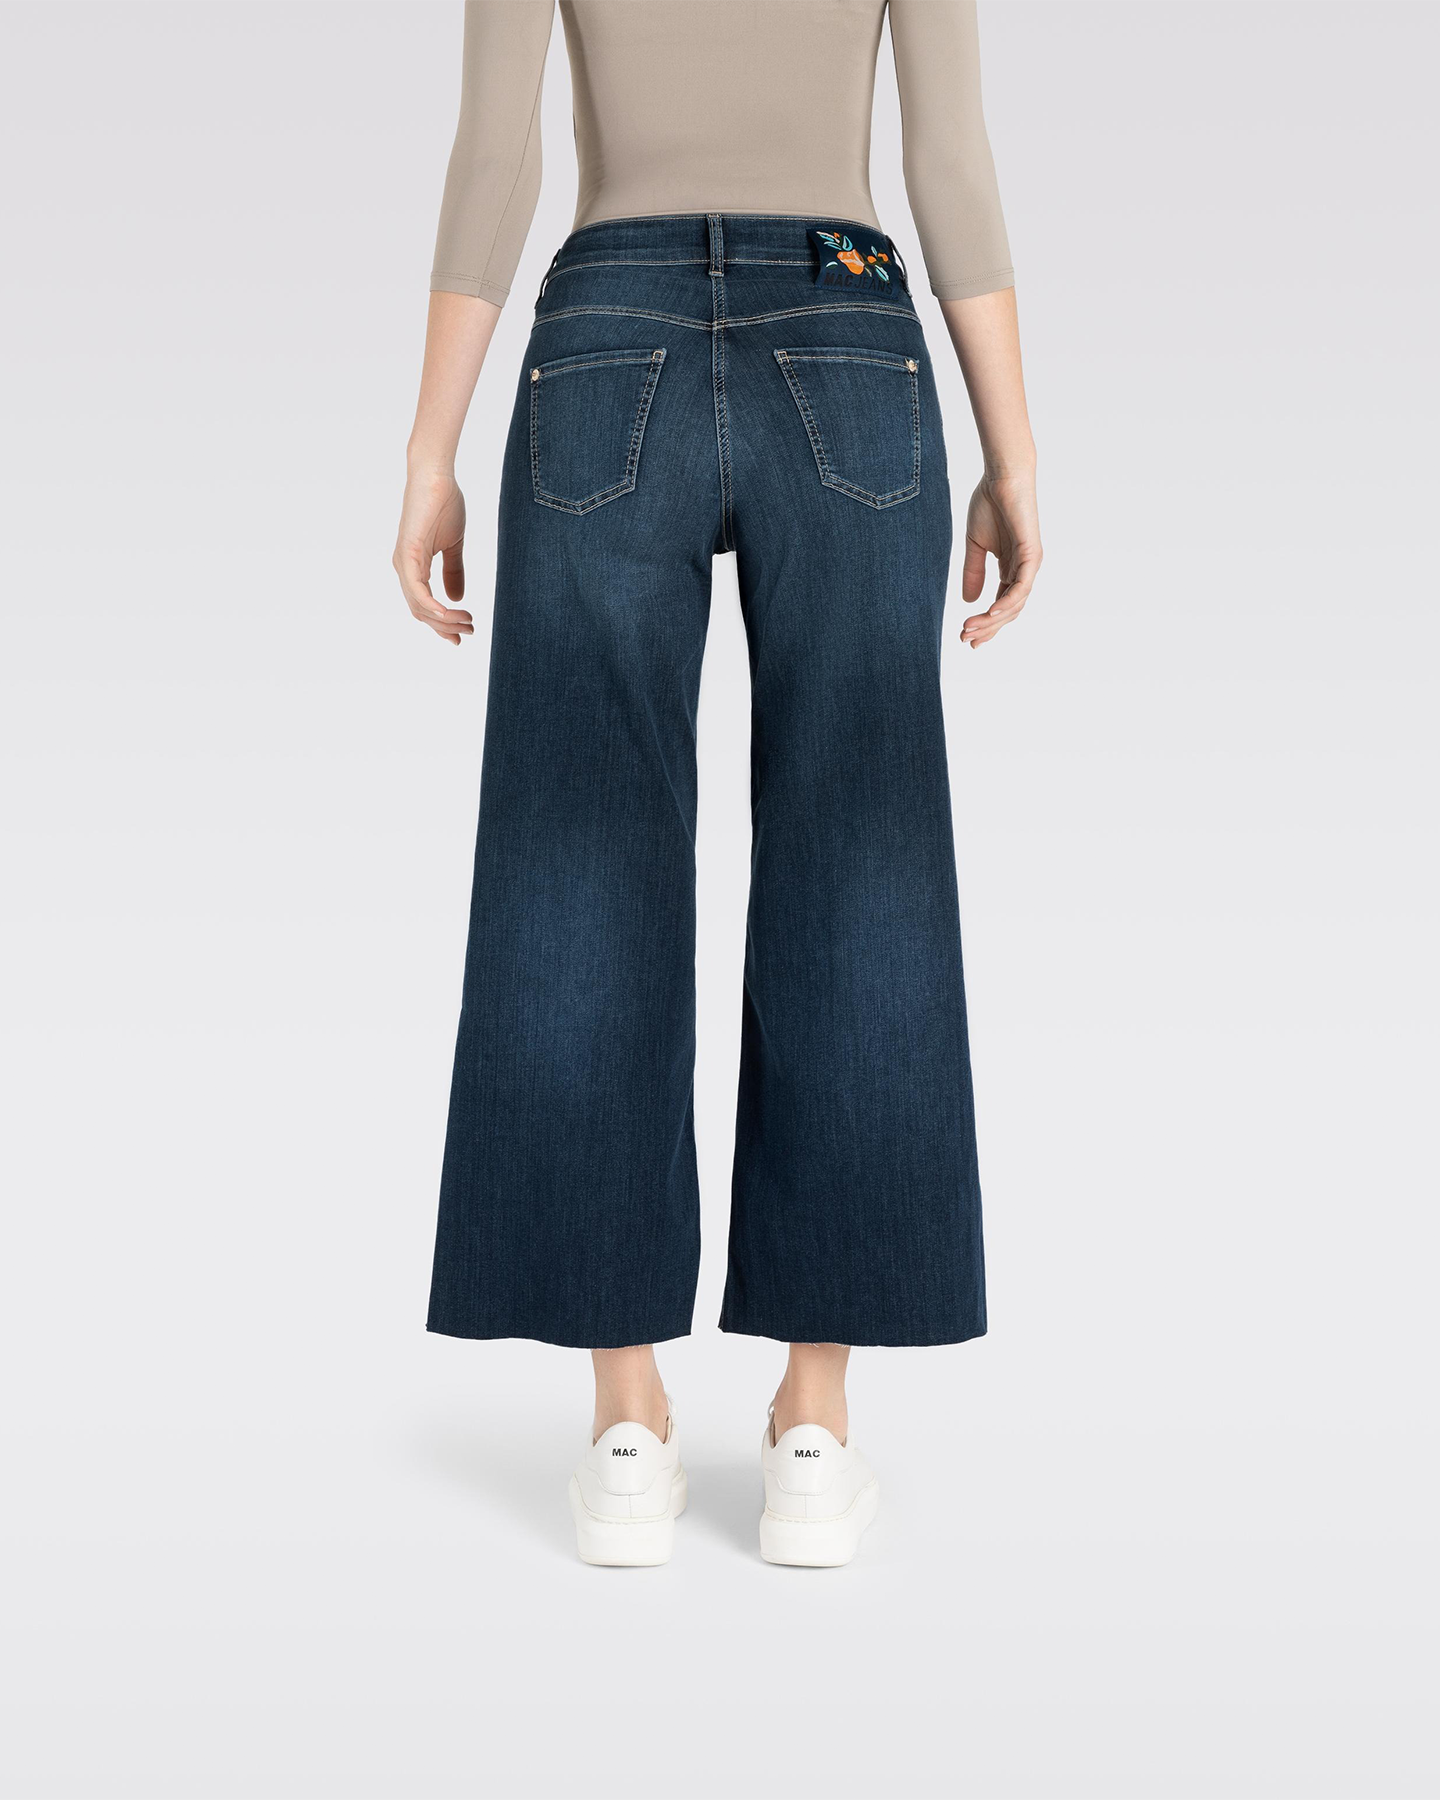 DREAM WIDE CROPPED JEANS - AUTHENTIC DARK